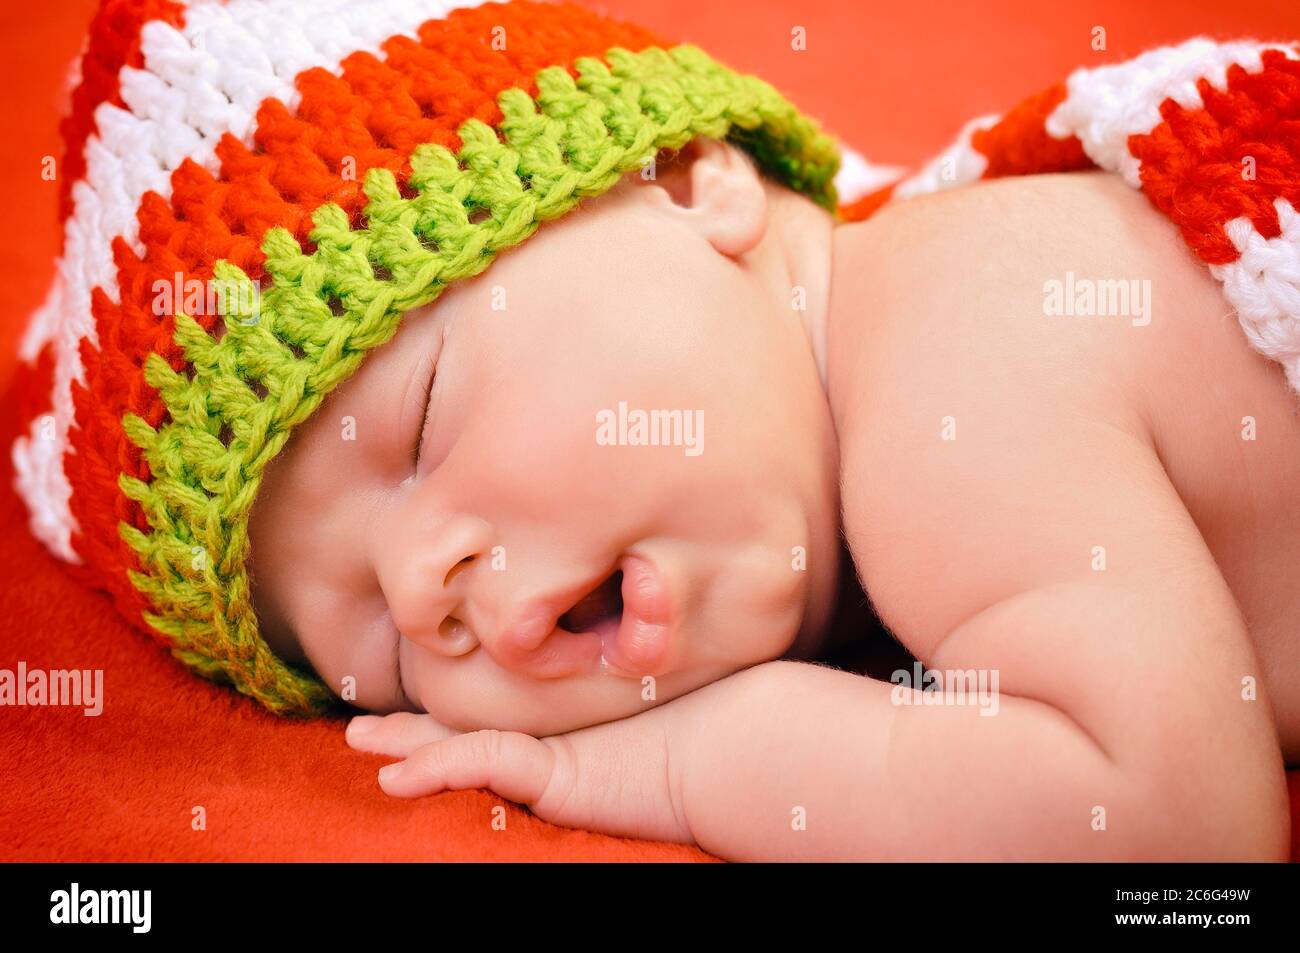 Beautiful newborn baby boy with cute cap sleeping peacefully on the soft red blanket Stock Photo